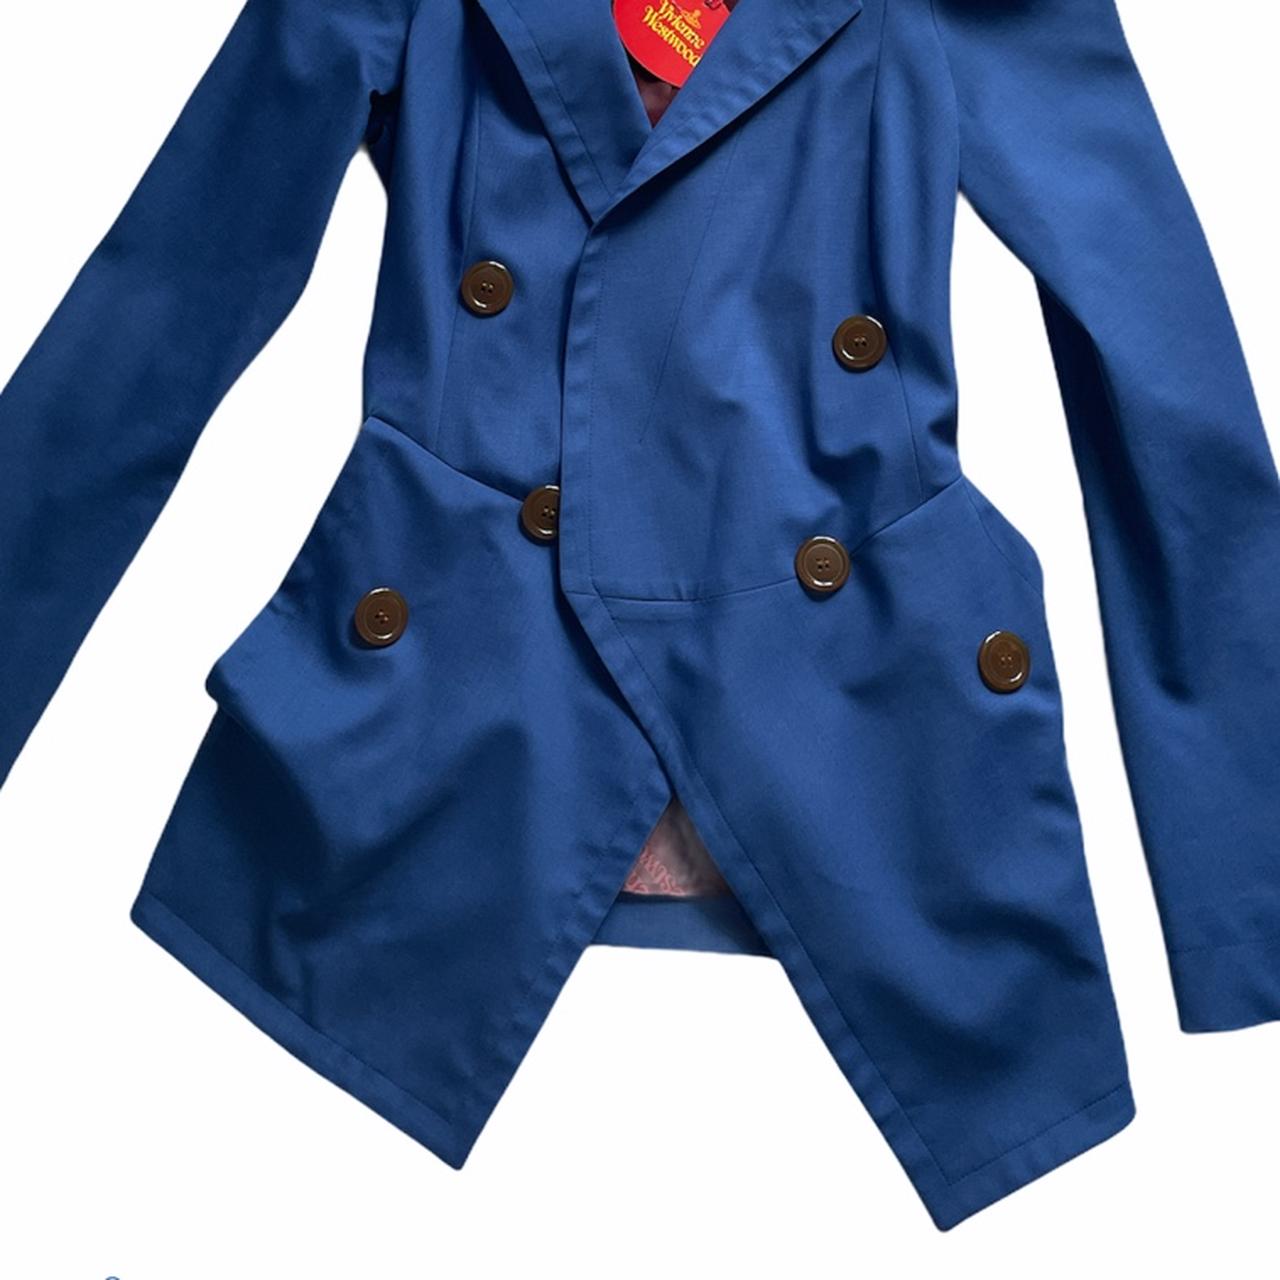 Vivienne Westwood Women's Blue and Red Jacket (4)